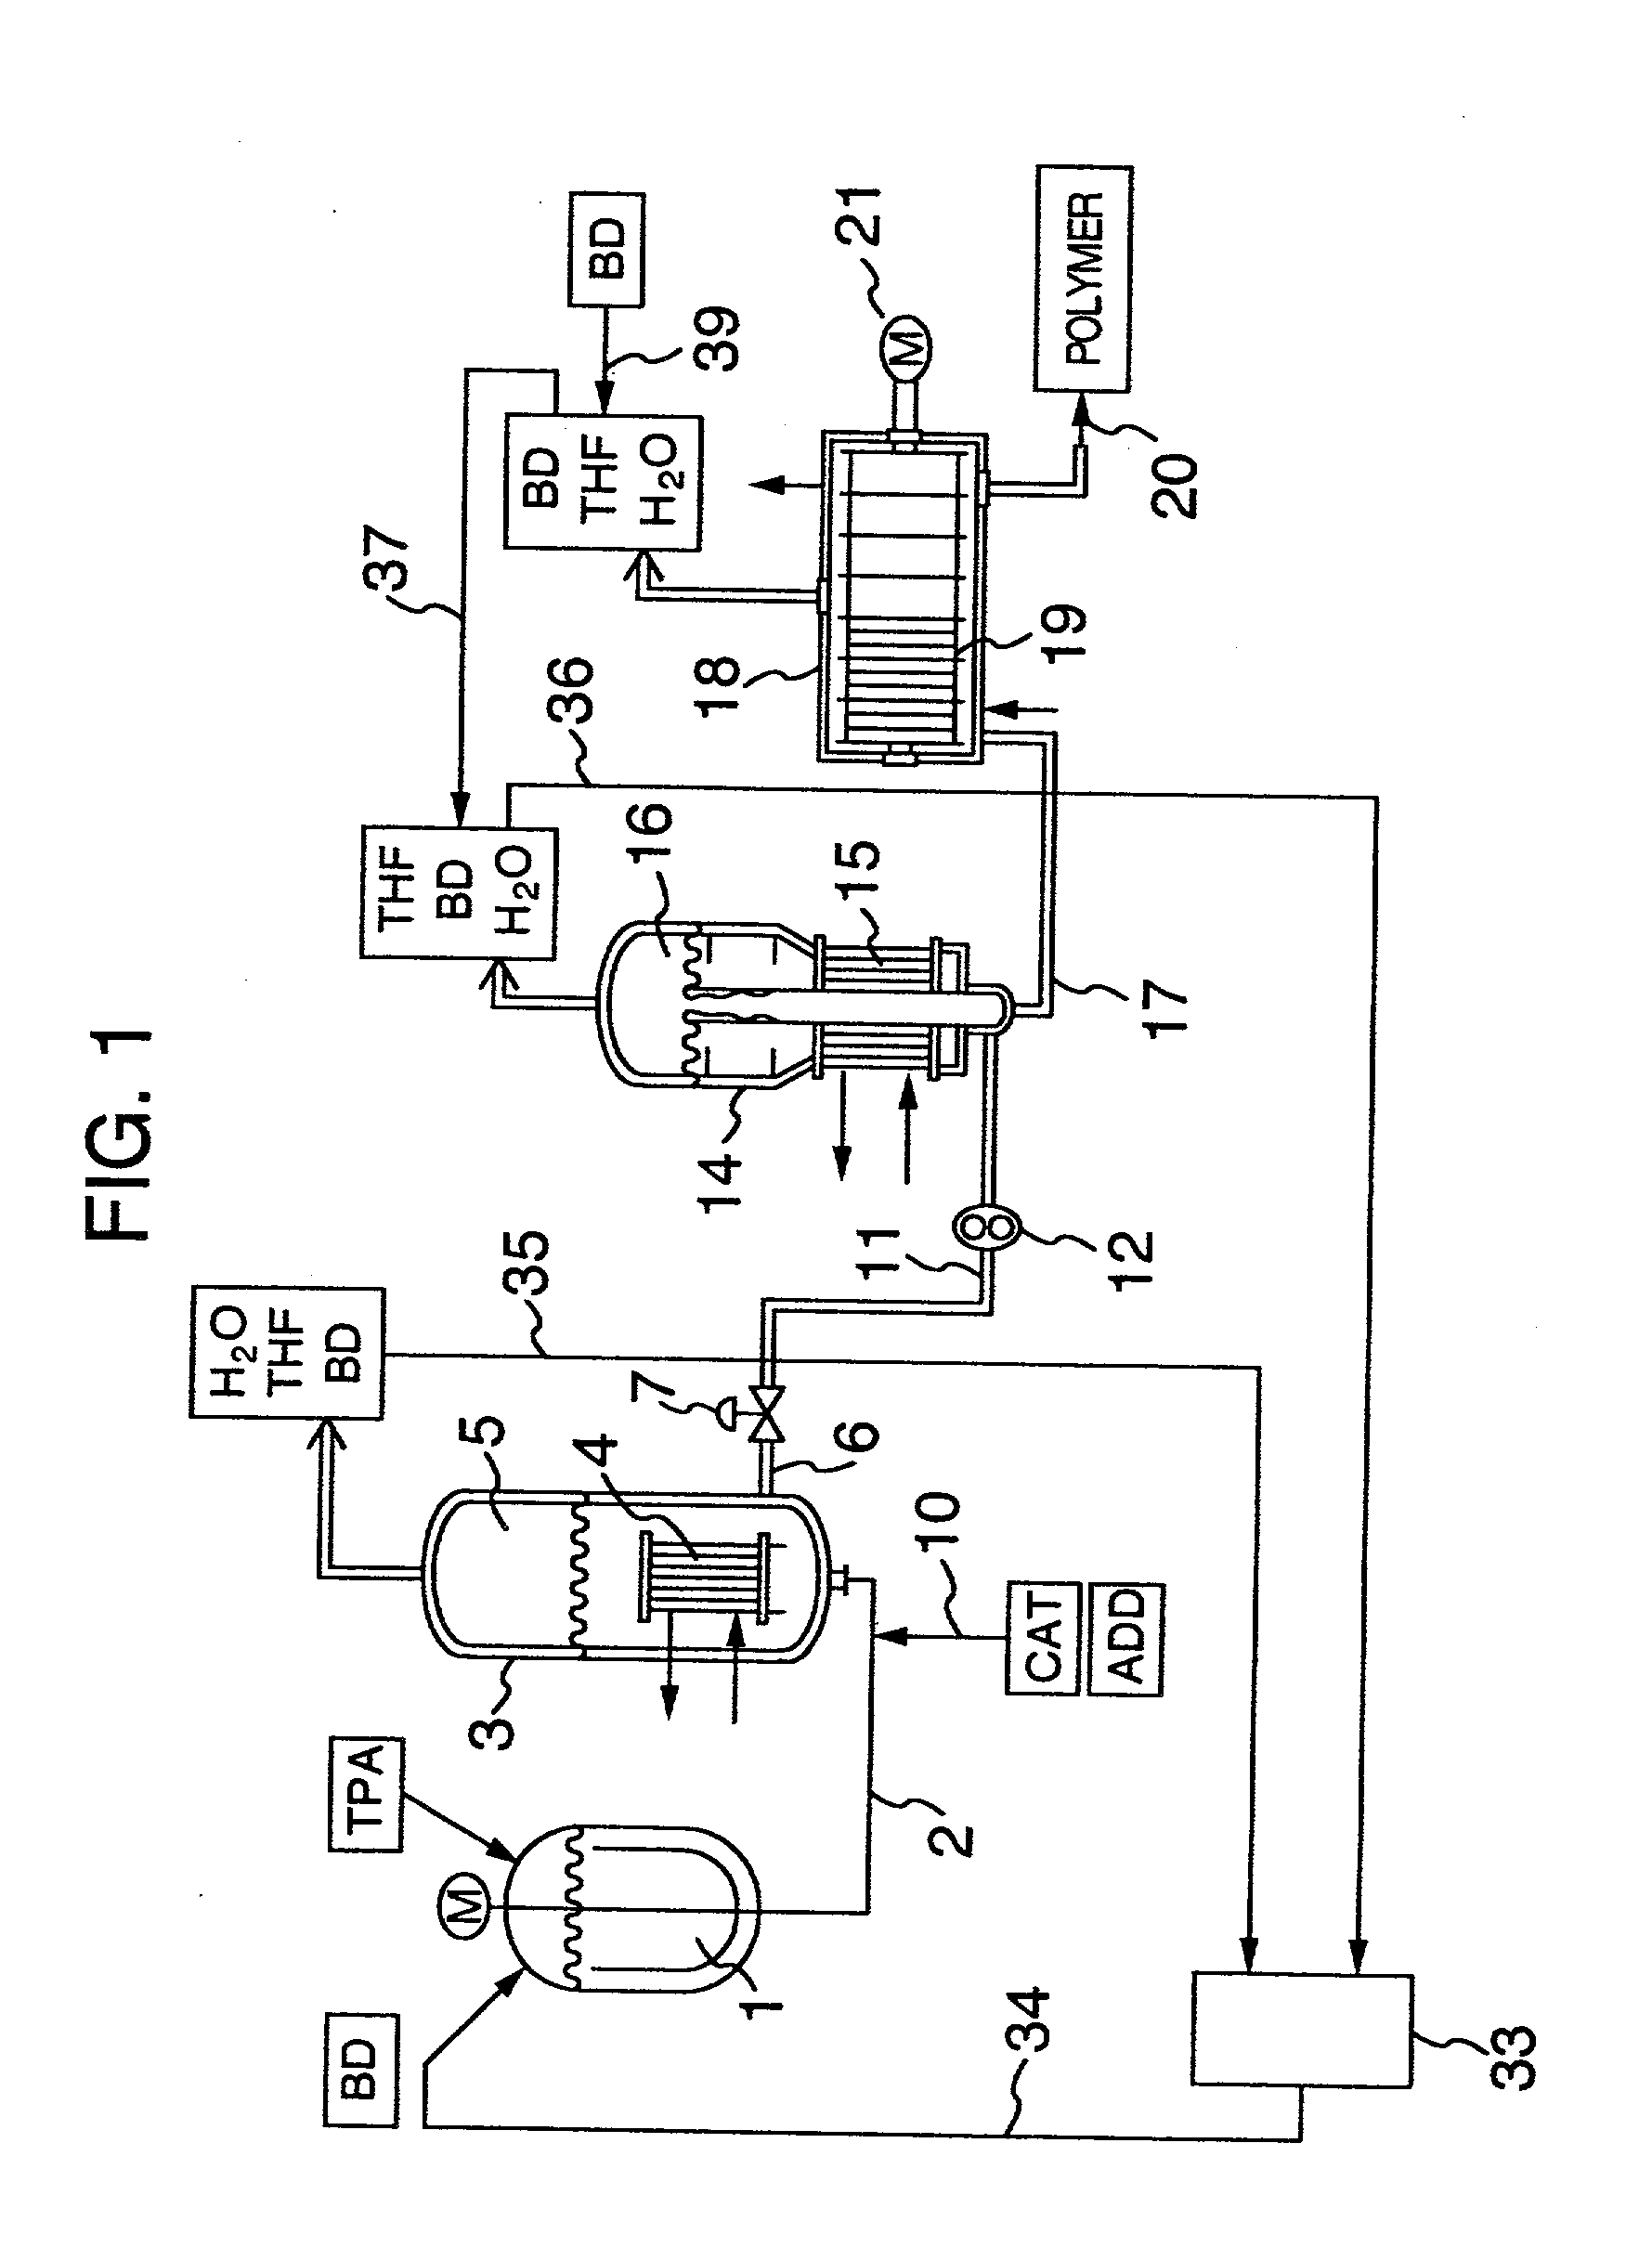 Process for continuously producing polybutylene terephthalate